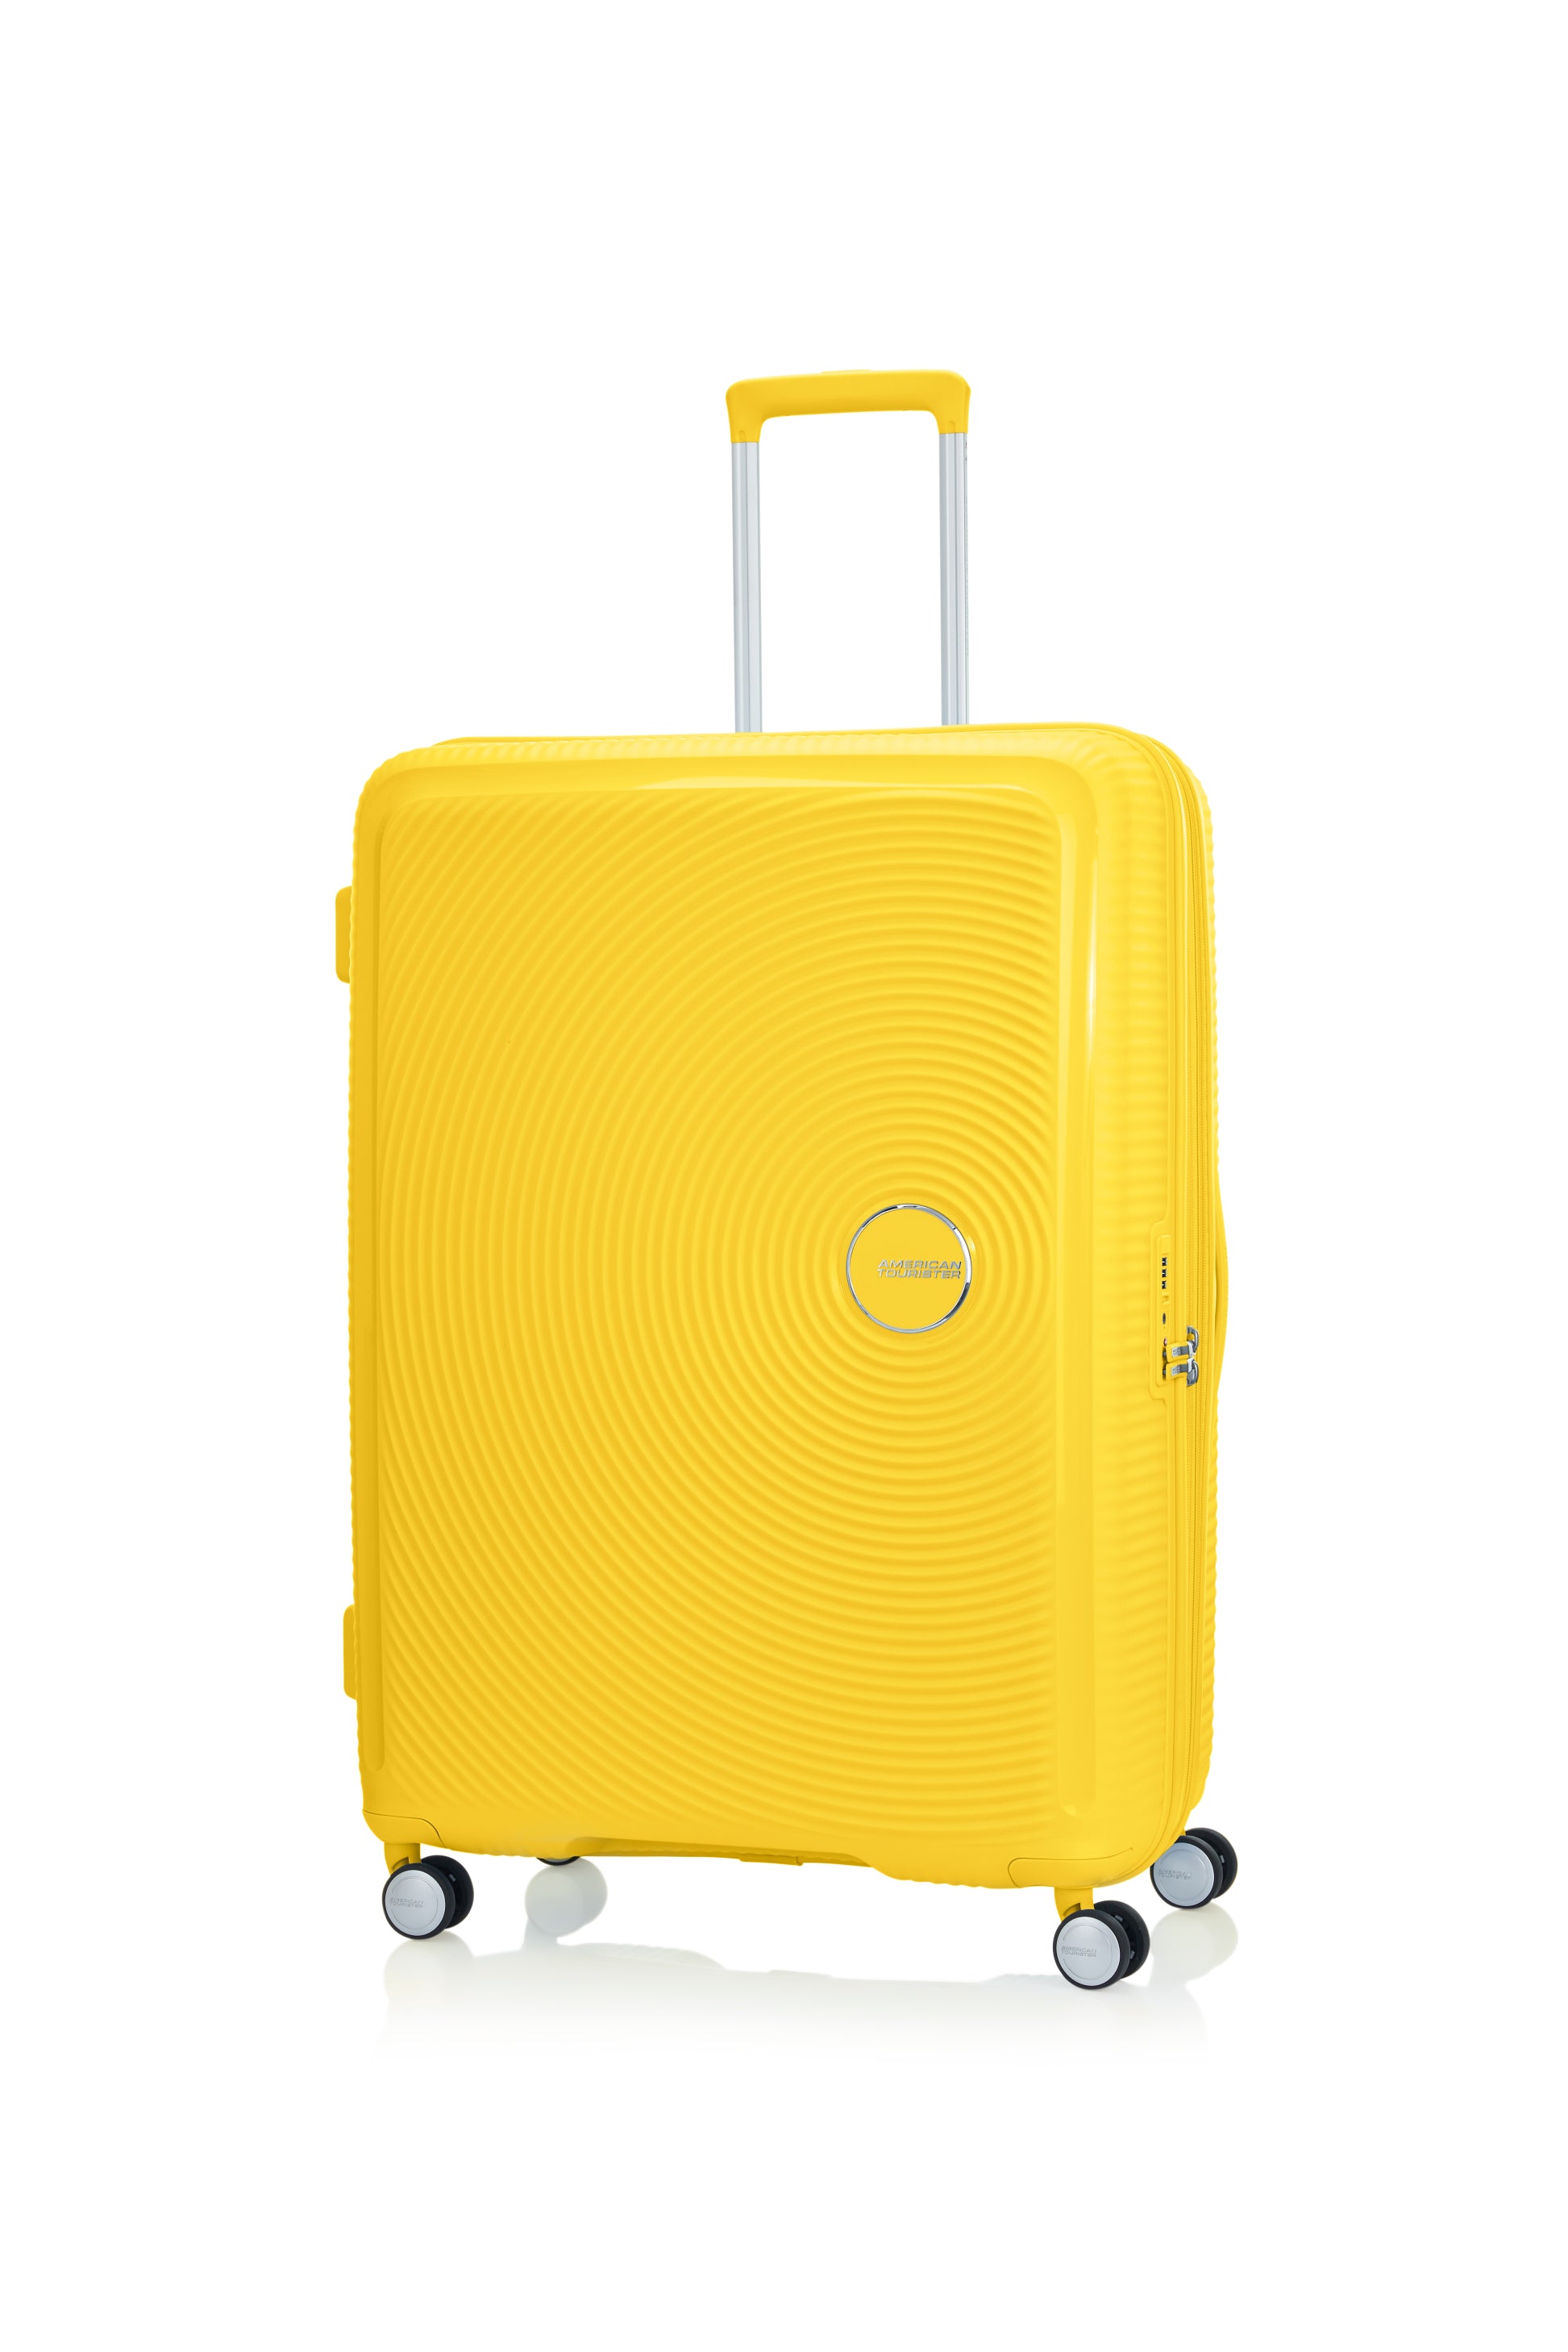 American Tourister - Curio 2.0 80cm Large Suitcase - Golden Yellow-7